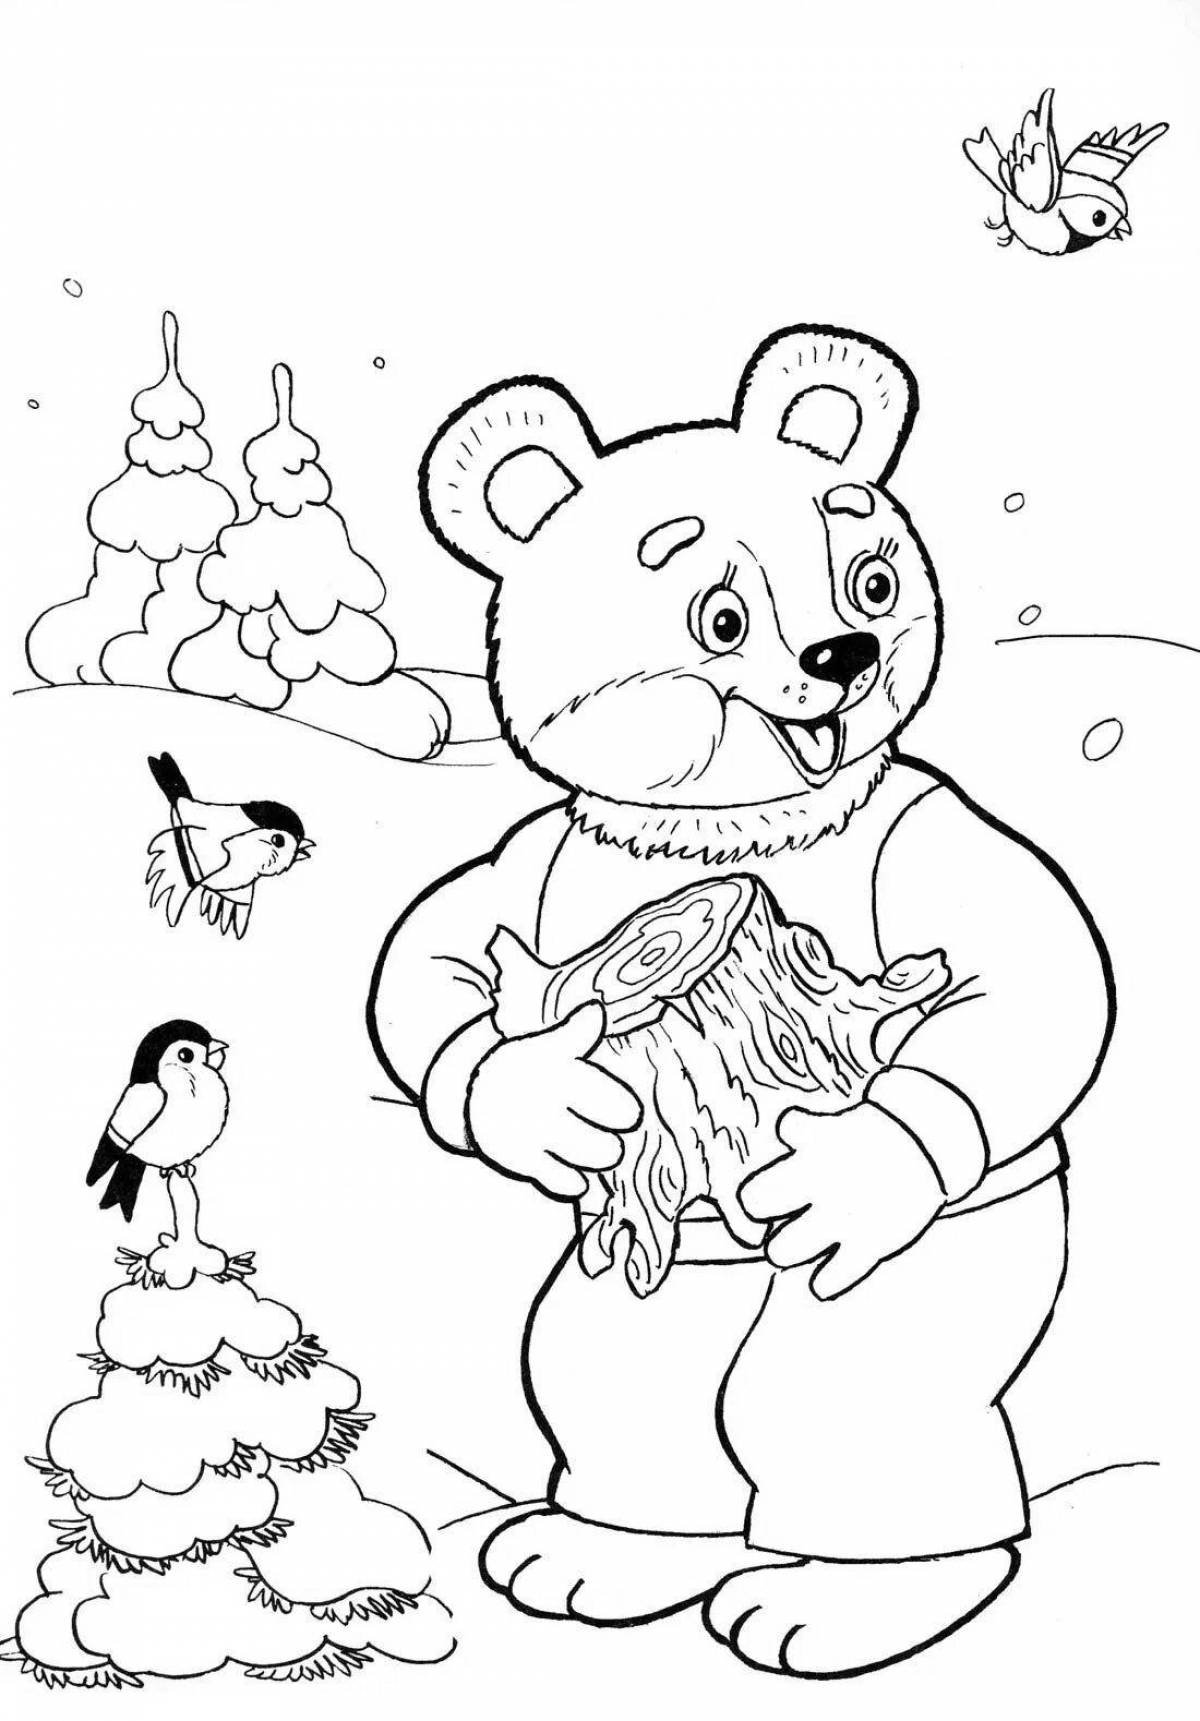 Coloring book funny bear in the forest